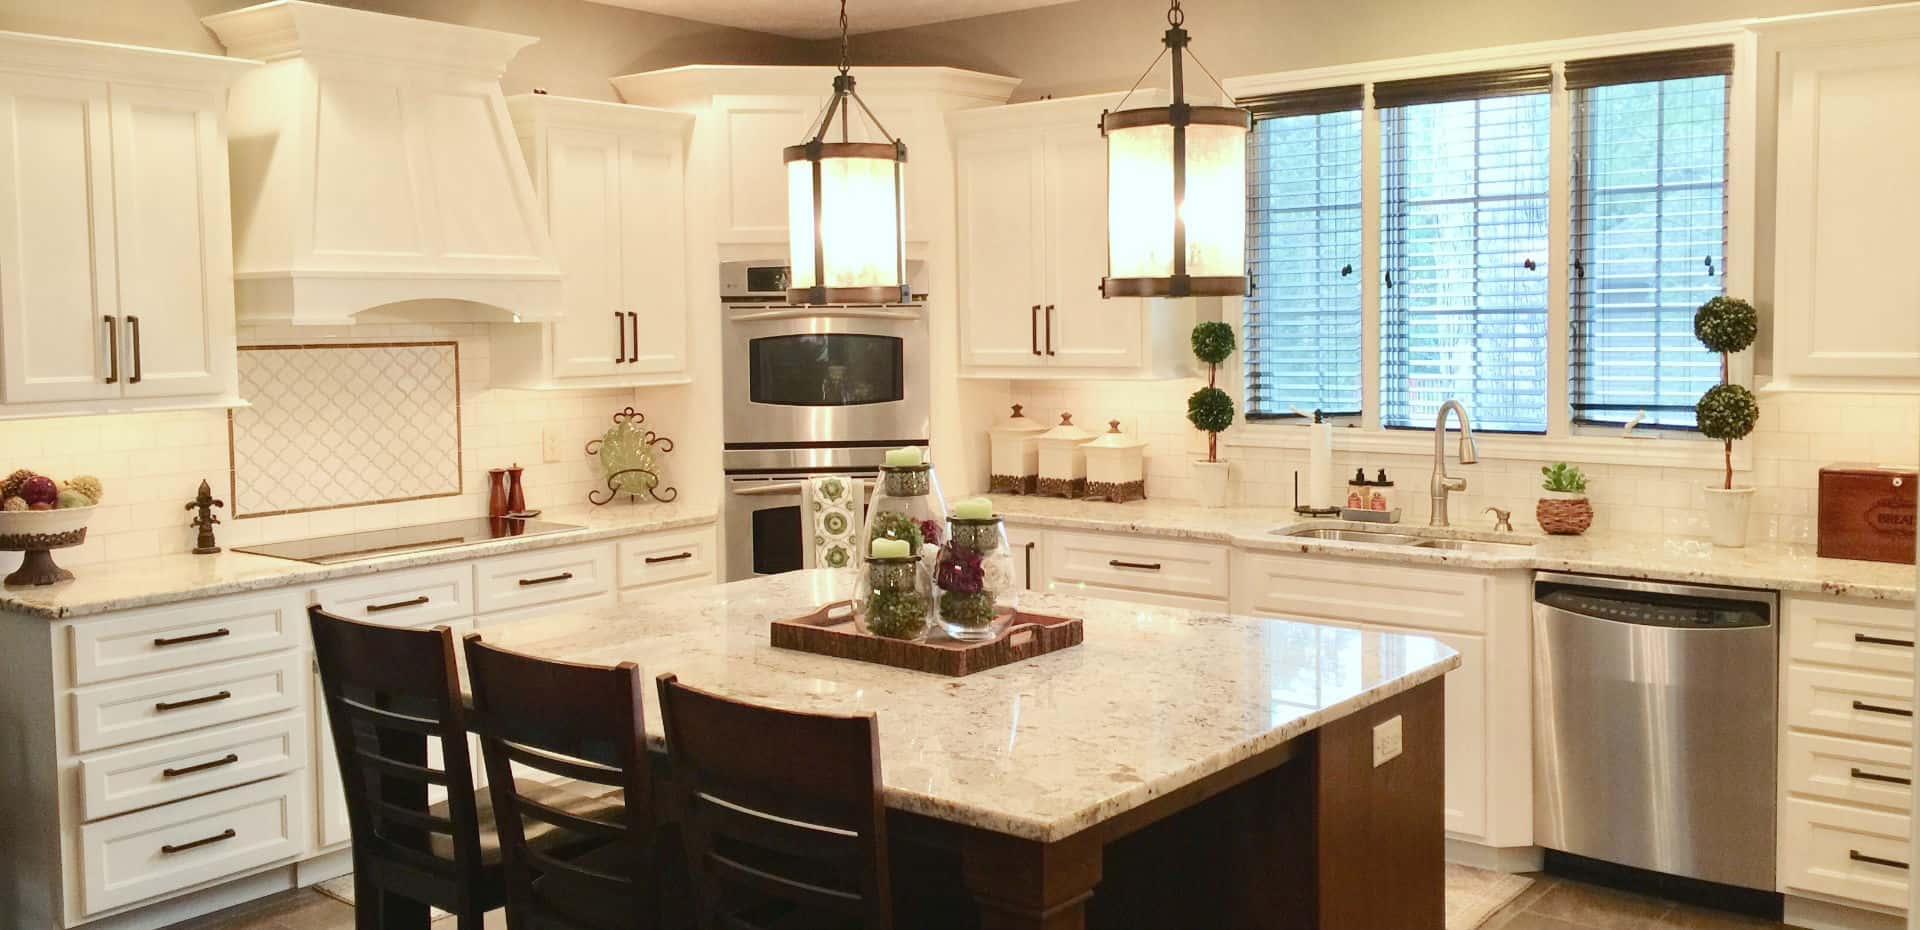 Cherrytree Kitchens Remodel On Time